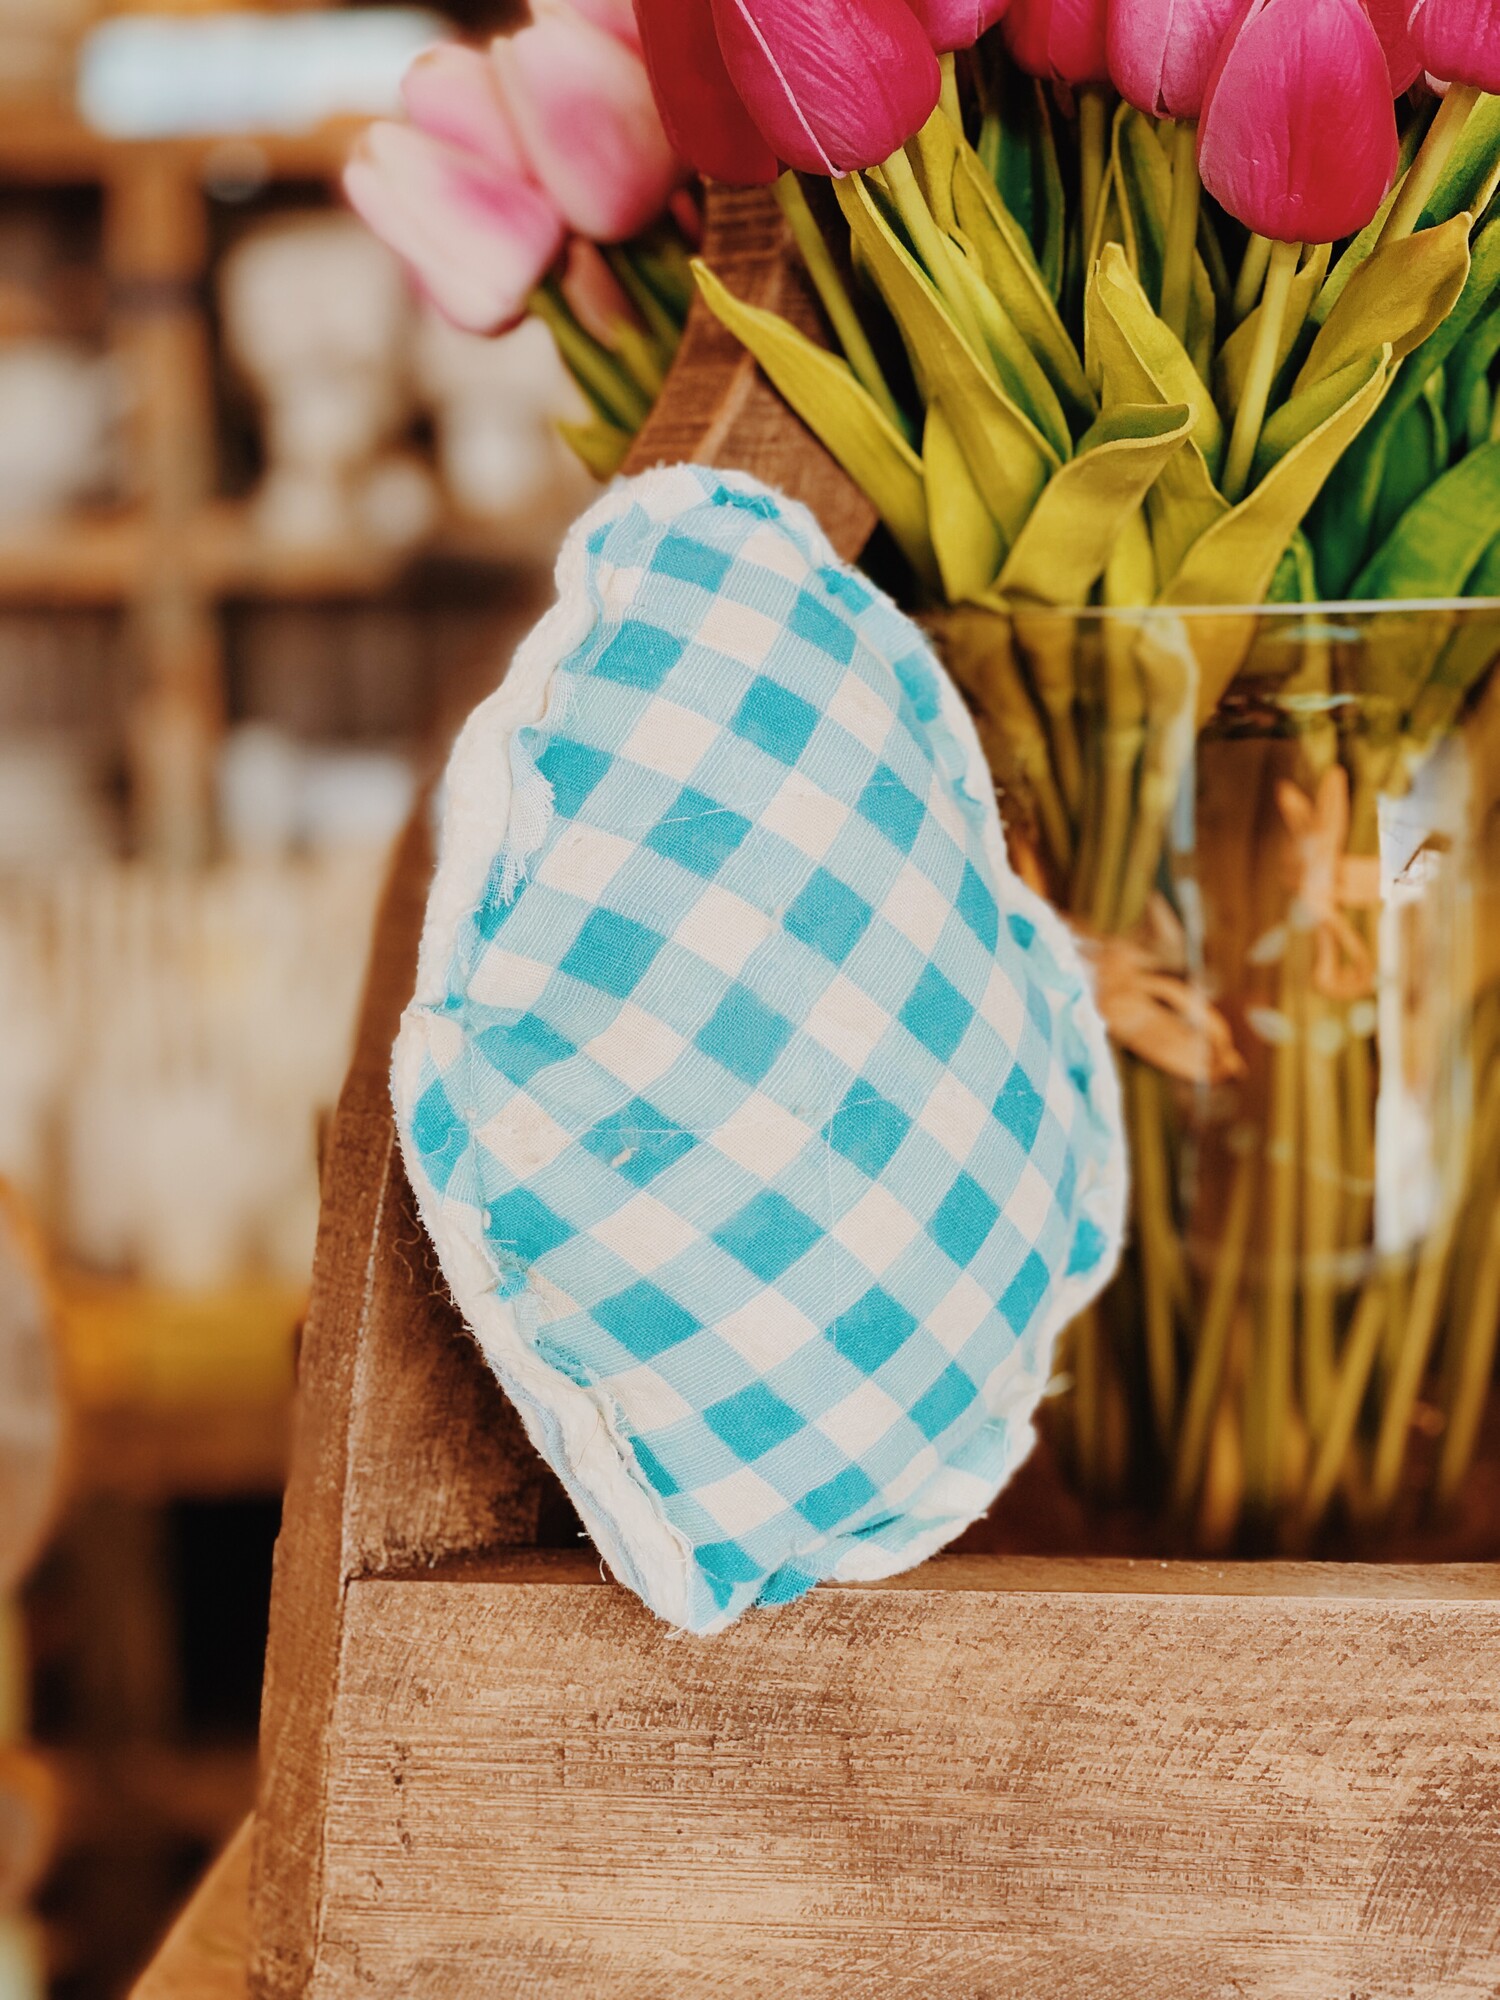 These adorable, decorative eggs were handmade from vintage fabrics! They measure about 8 by 5 inches.